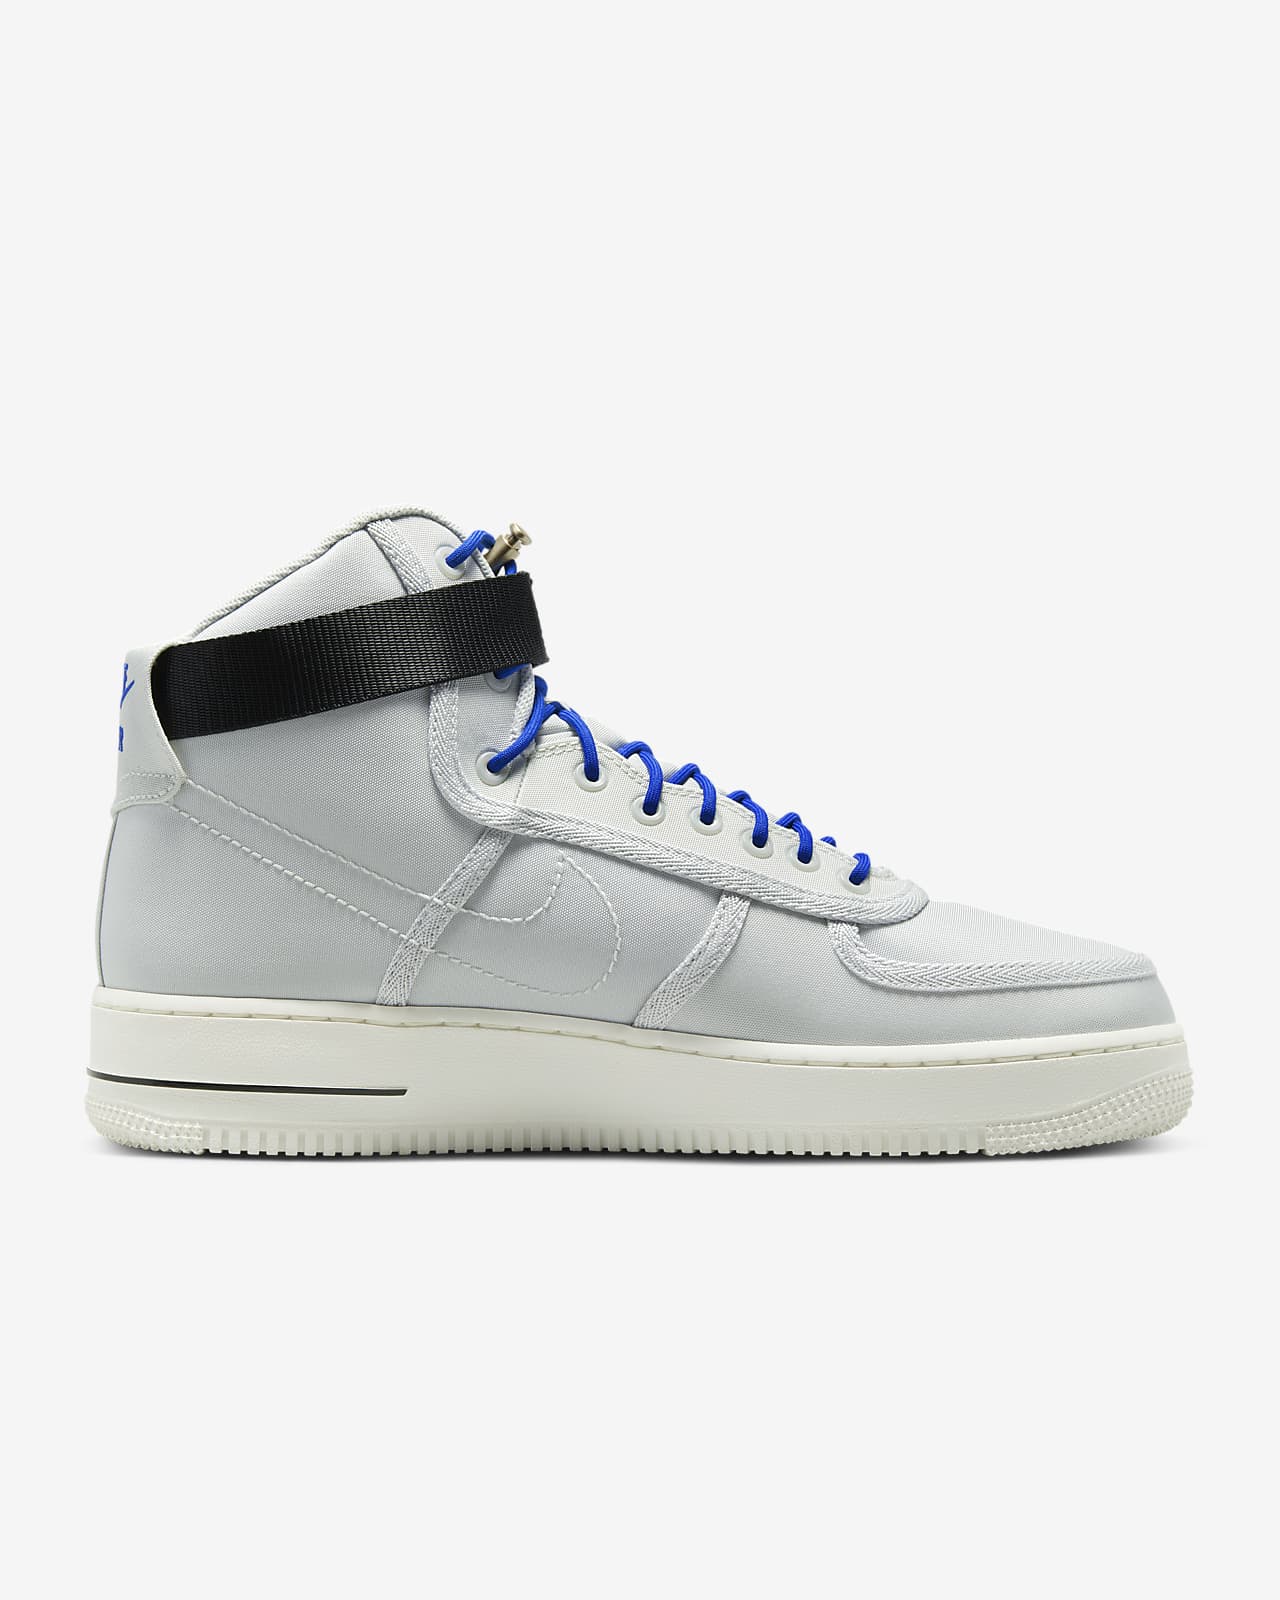 Nike Air Force 1 High '07 LV8 Men's Shoes. Nike IN